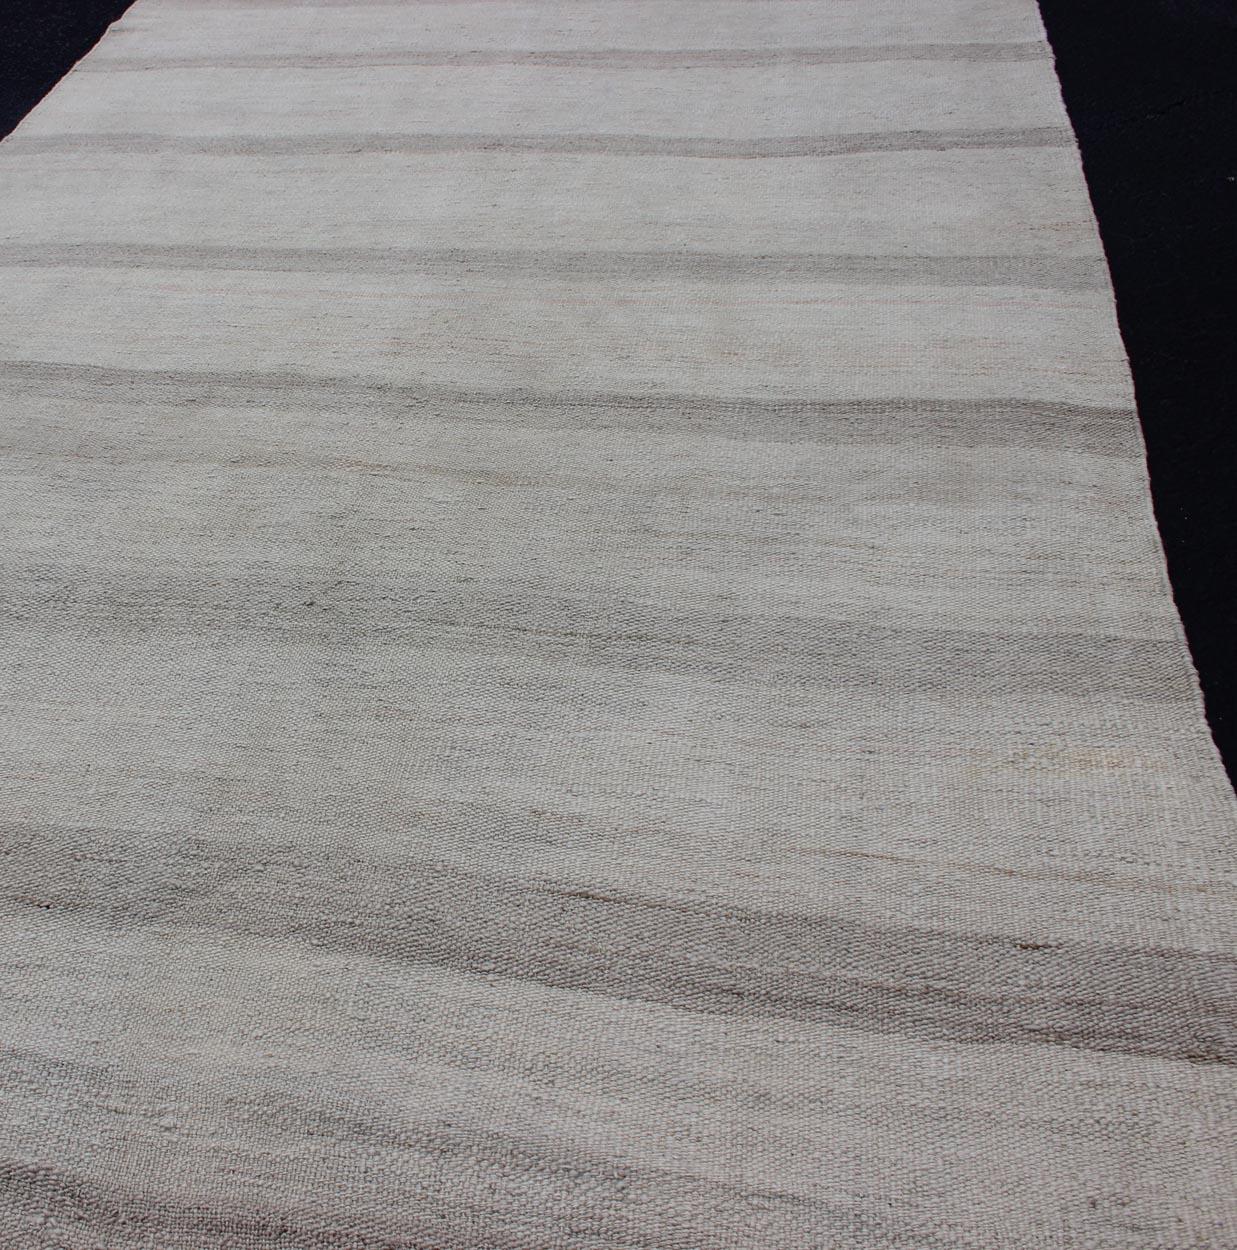 20th Century Vintage Turkish Kilim Runner with Stripes in Light Taupe and Gray Tones For Sale